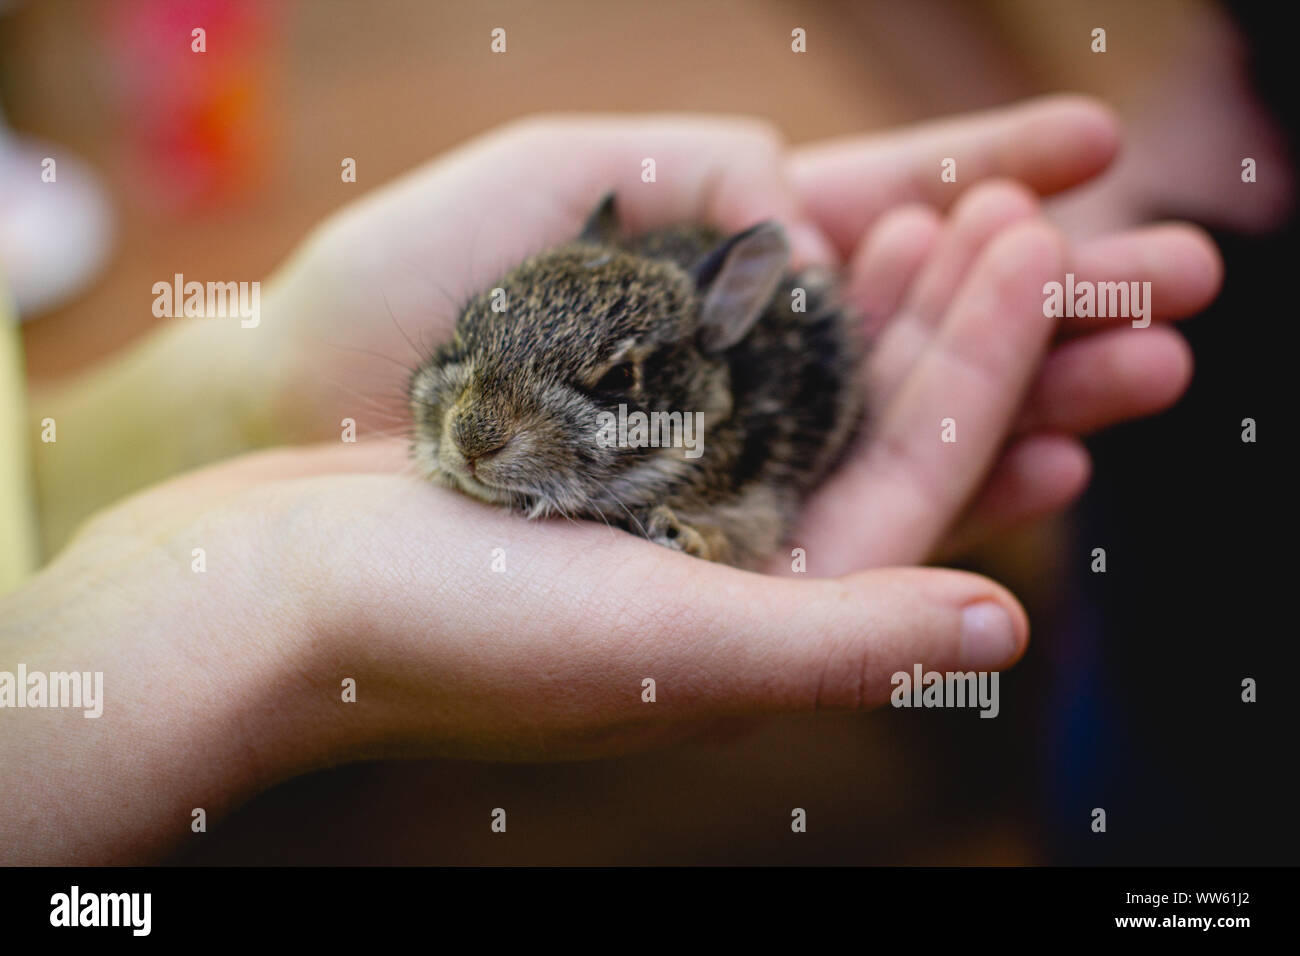 Girl carefully holding a baby rabbit in her hands Stock Photo